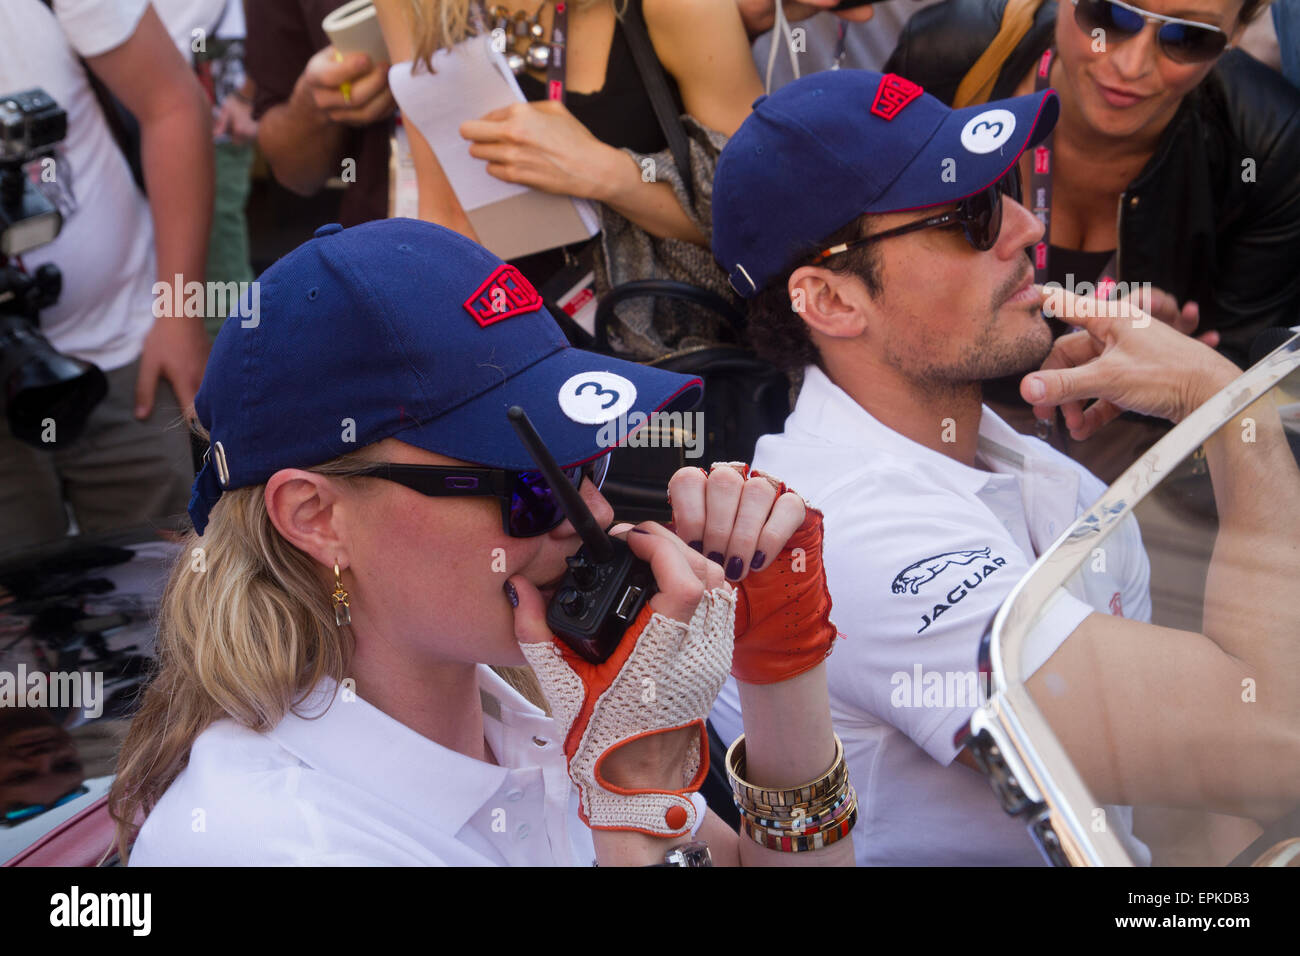 Models Jodie Kidd and David Gandy in Piazza Vittoria for the start of the classic Italian road race the Mille Miglia from Brescia to Rome and back again covering 1000 miles. 14.05.2015 Stock Photo